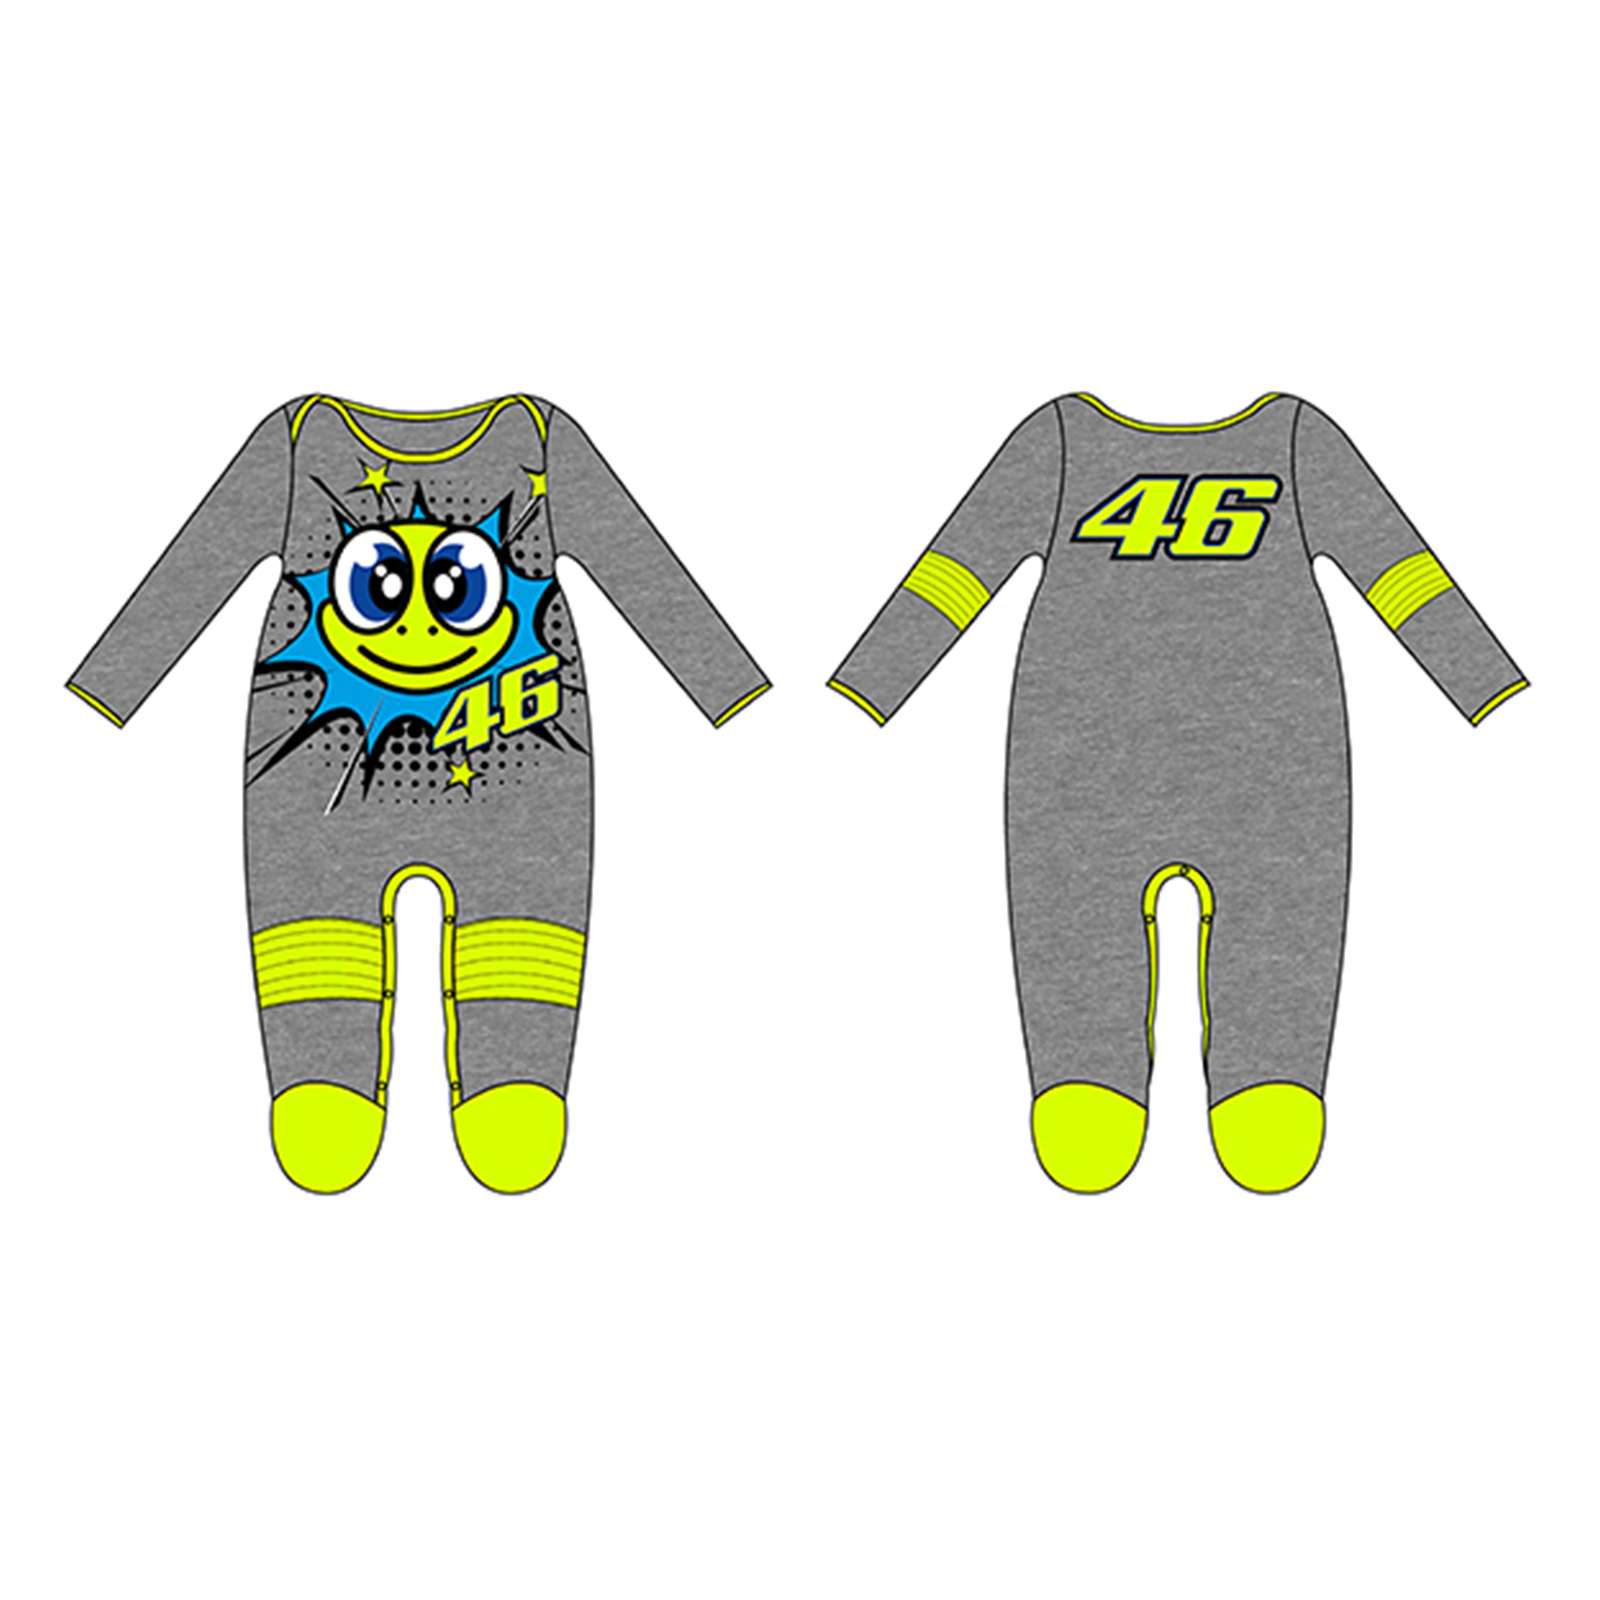 Blue Black 24 Months VR46 Valentino Rossi Yamaha Racing Babies Overall